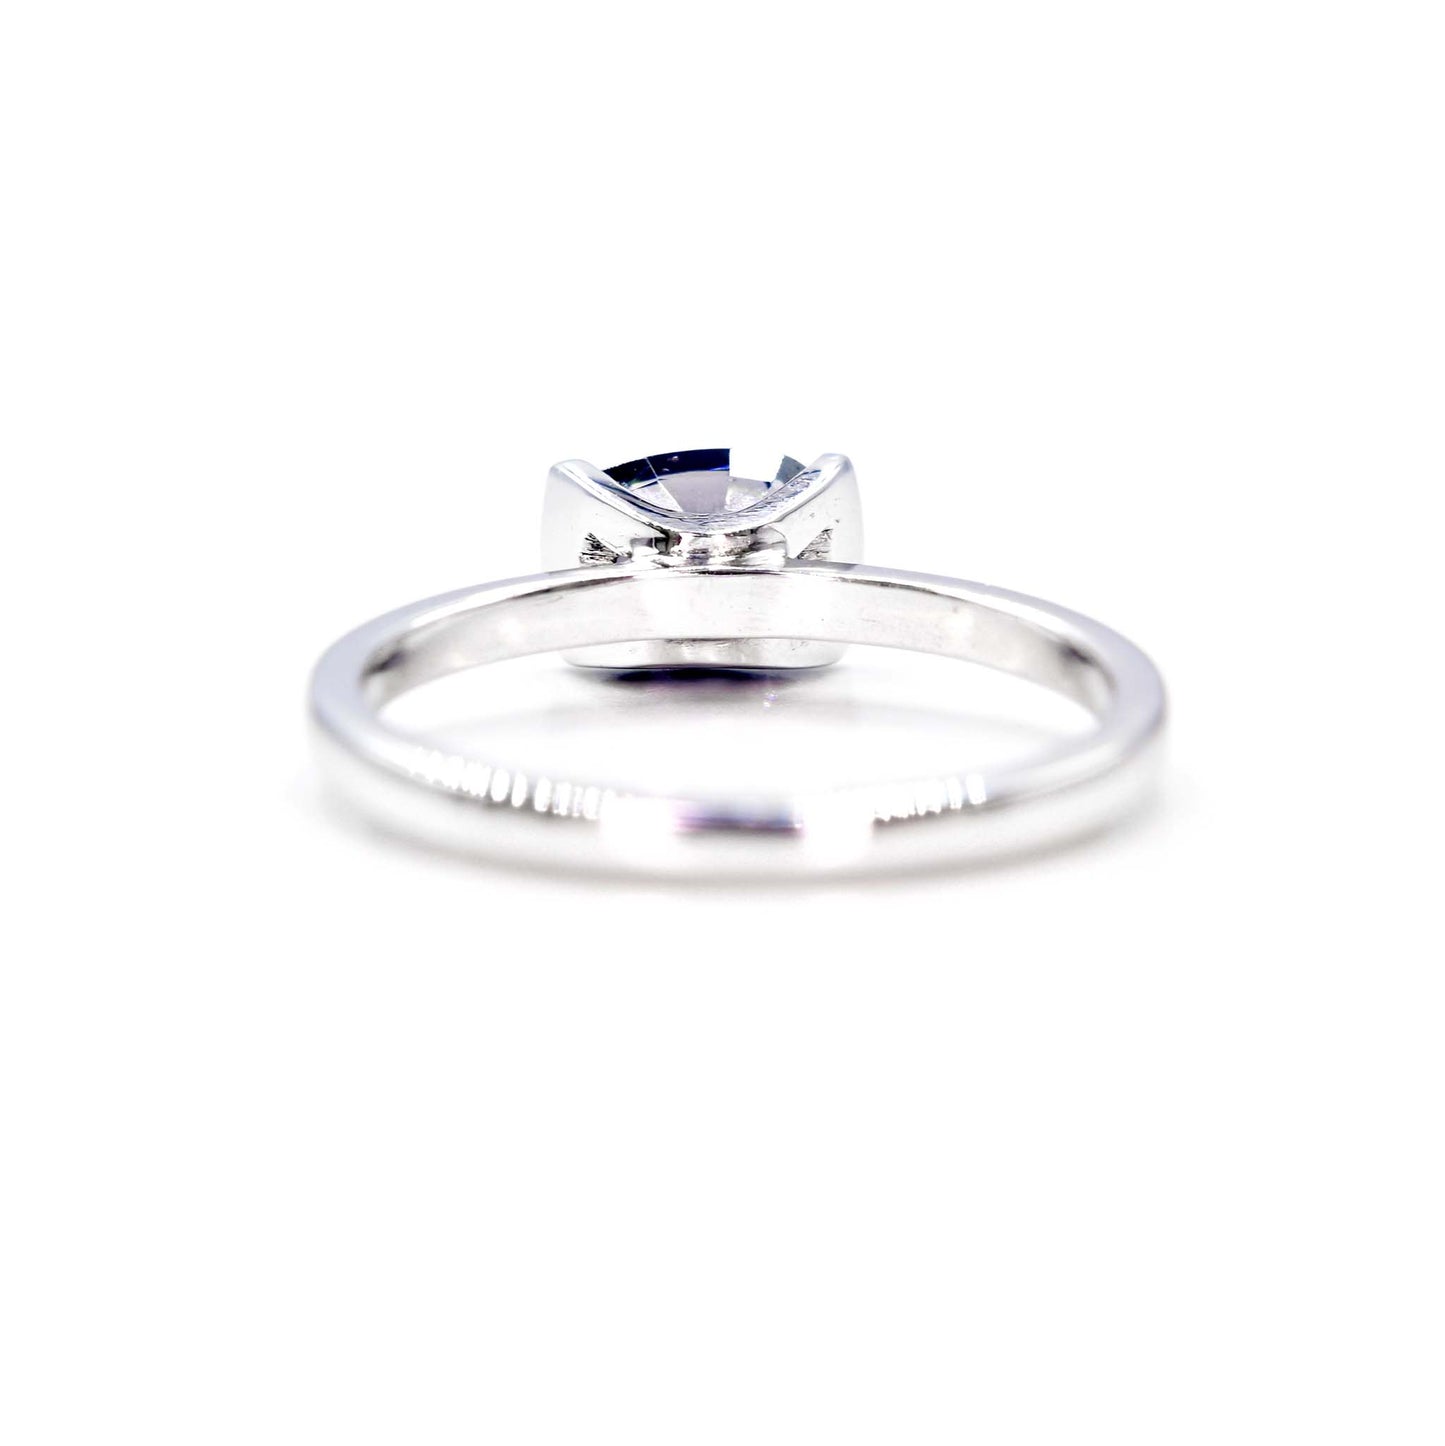 The build of handmade spinel ring with 14k white gold